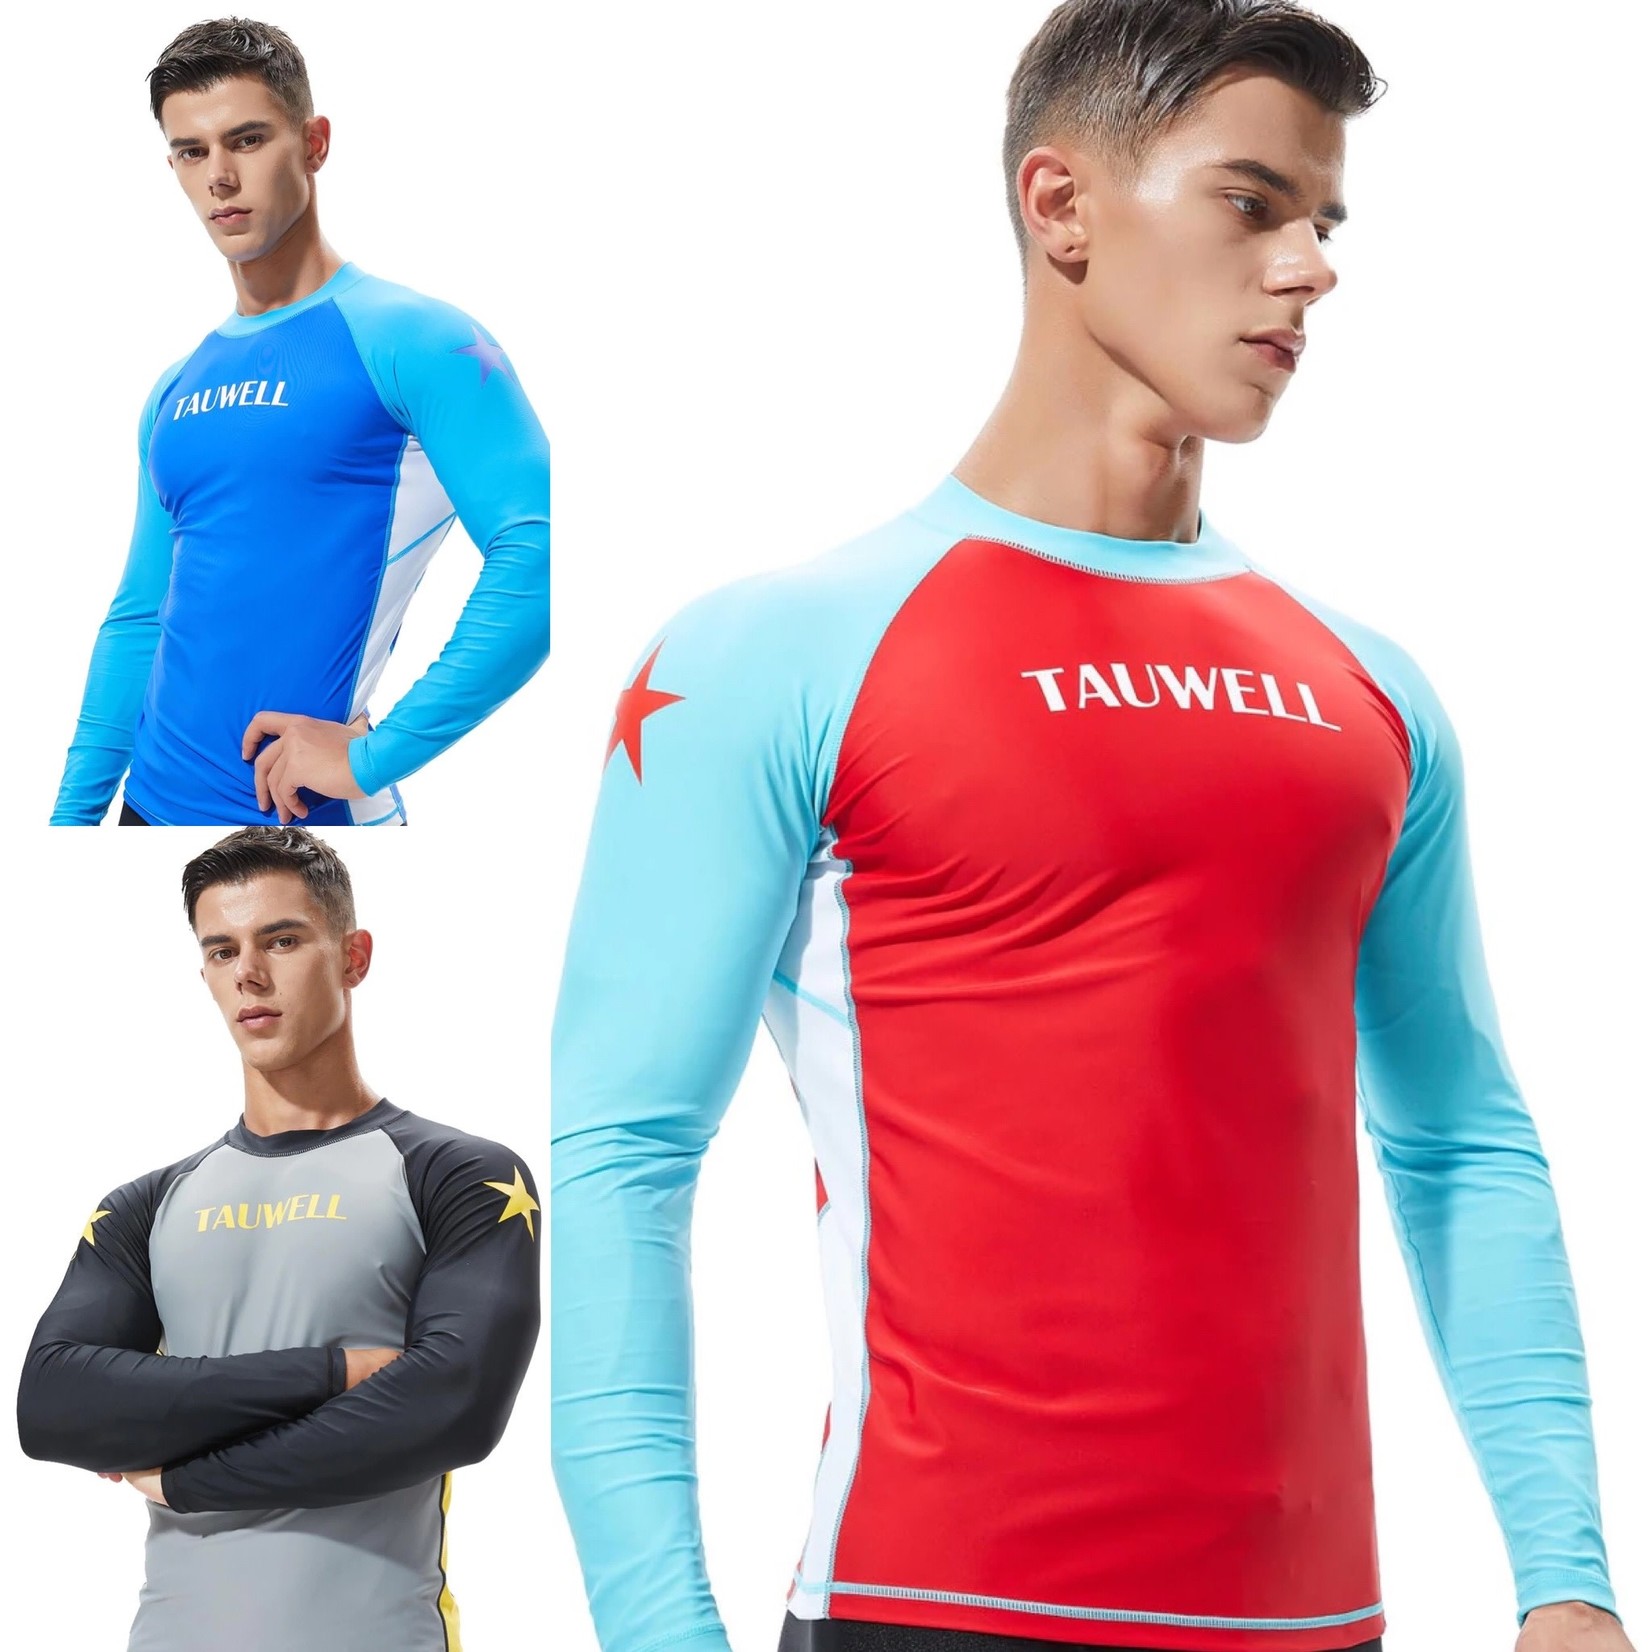 Tauwell TAUWELL Men’s Long Sleeve Rash Guard Surfing Shirt with Star